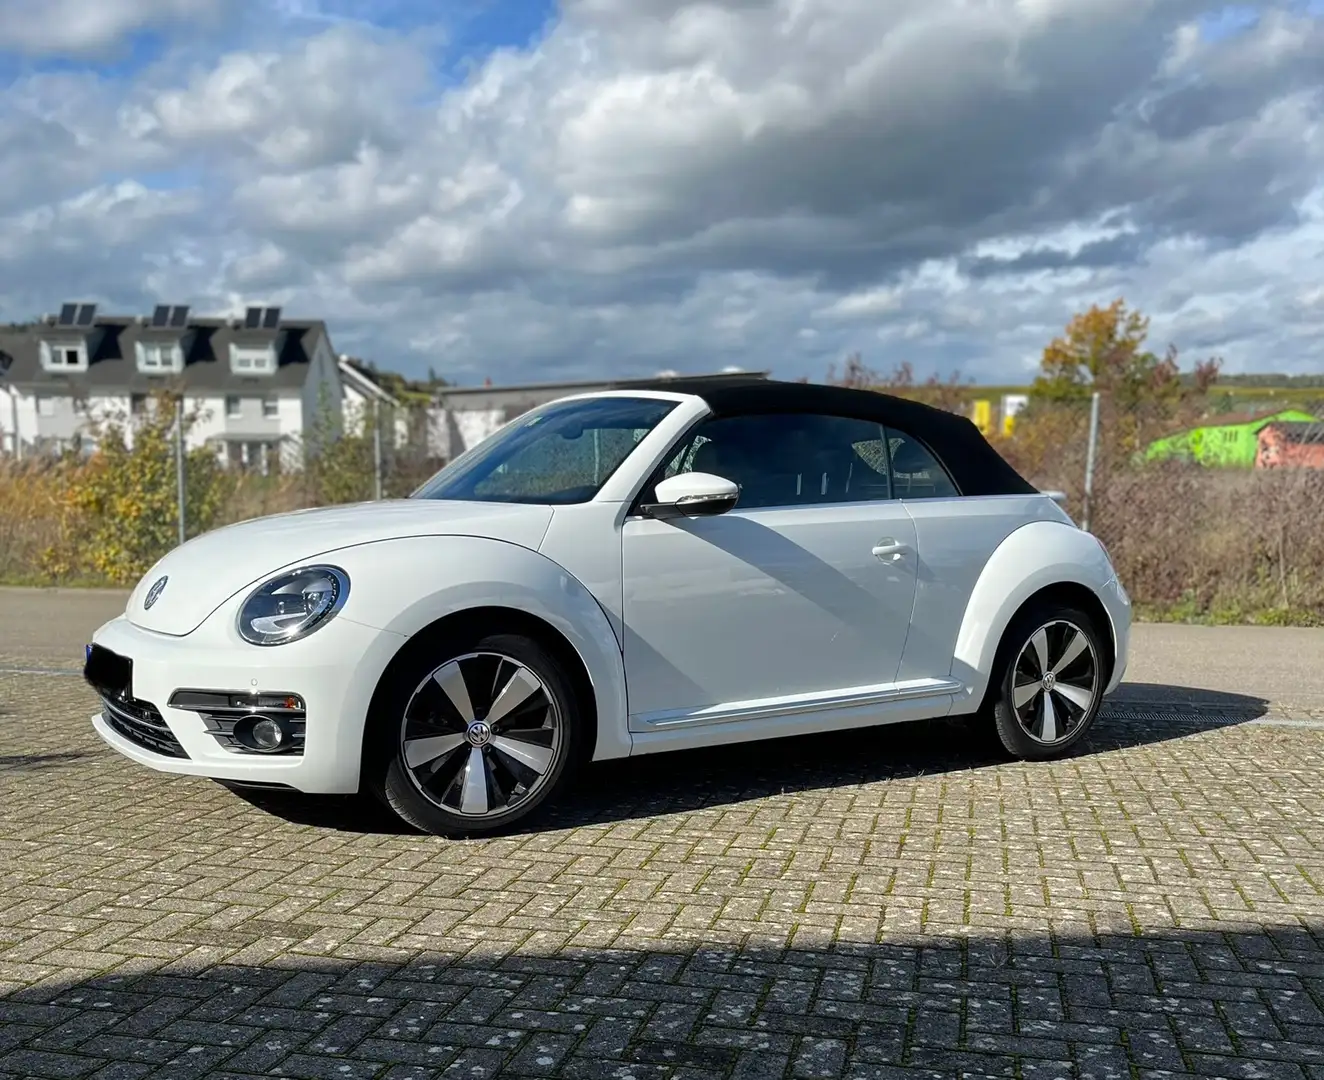 Volkswagen Beetle The Beetle Cabriolet 1.2 TSI (BlueMotion Tech) Exc Alb - 1